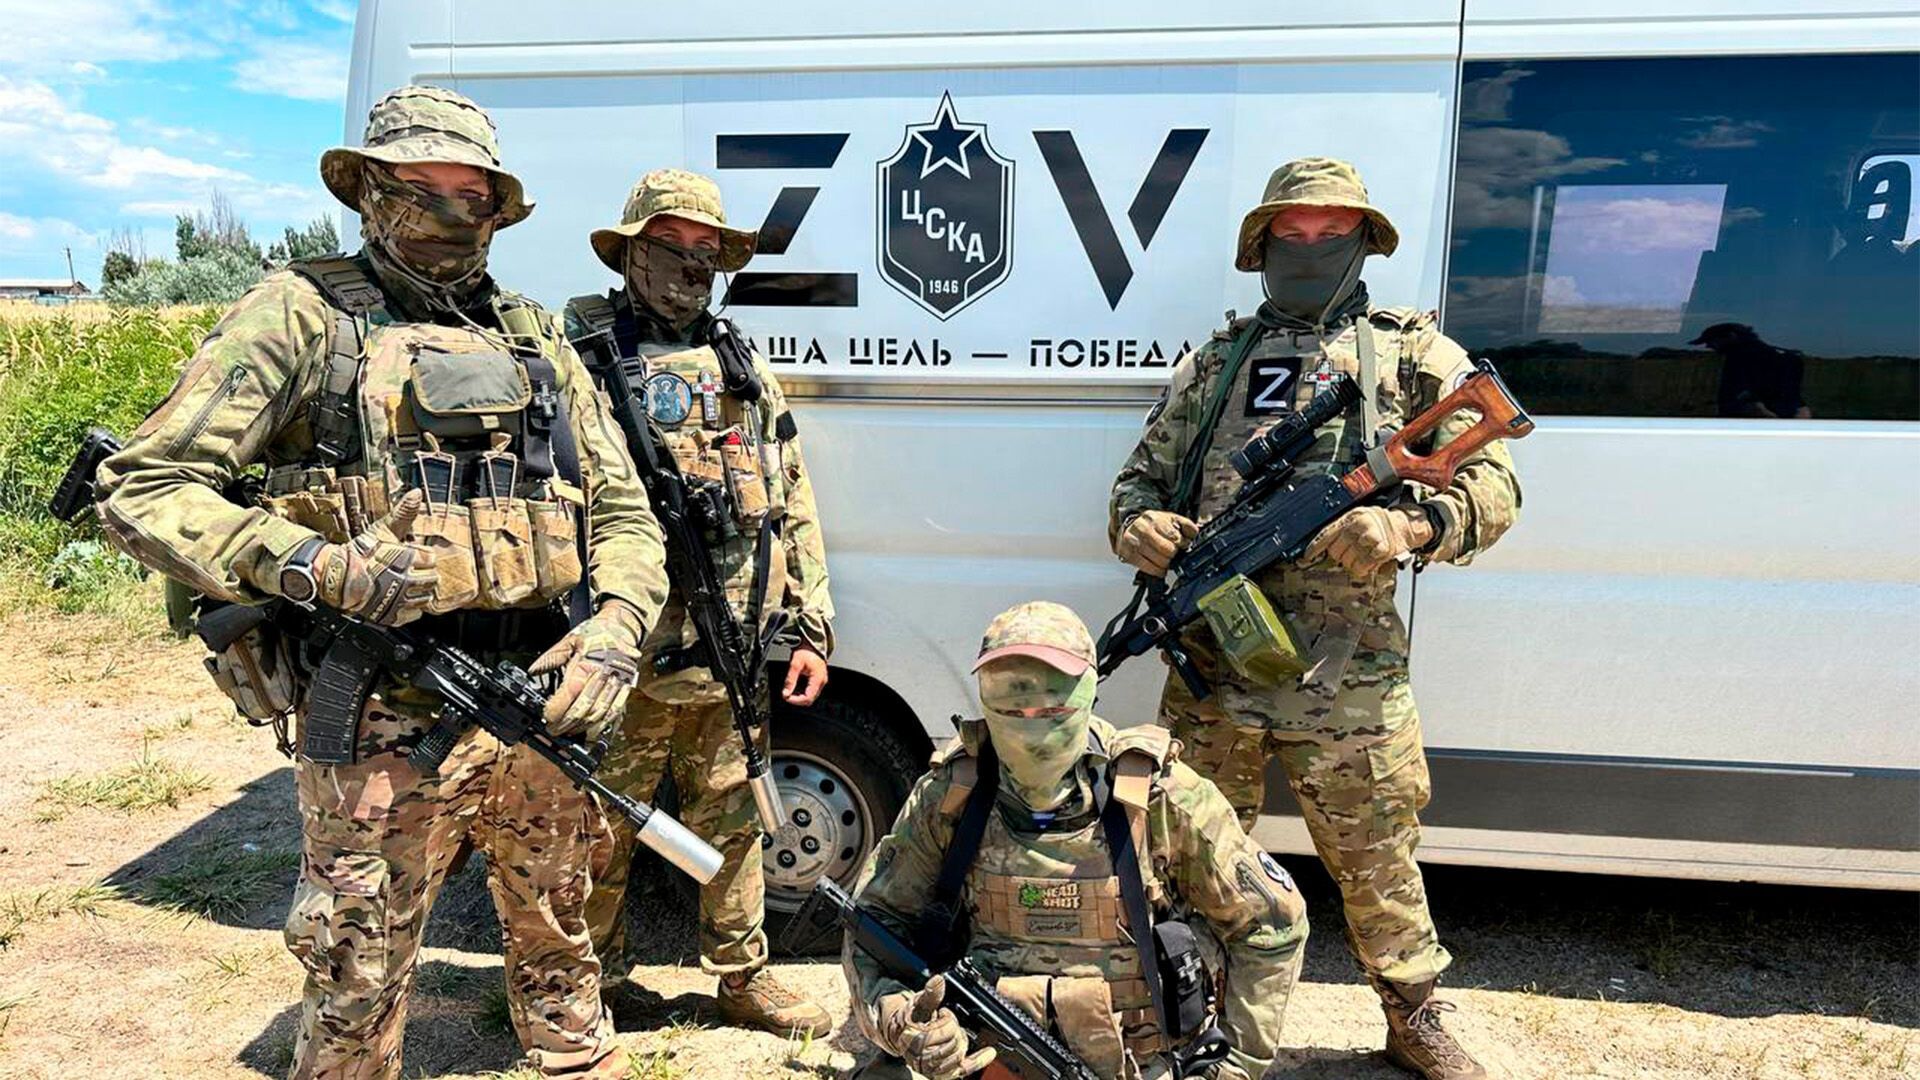 A well-known Moscow club helped terrorists fighting in Ukraine and confirmed its ''participation in genocide''